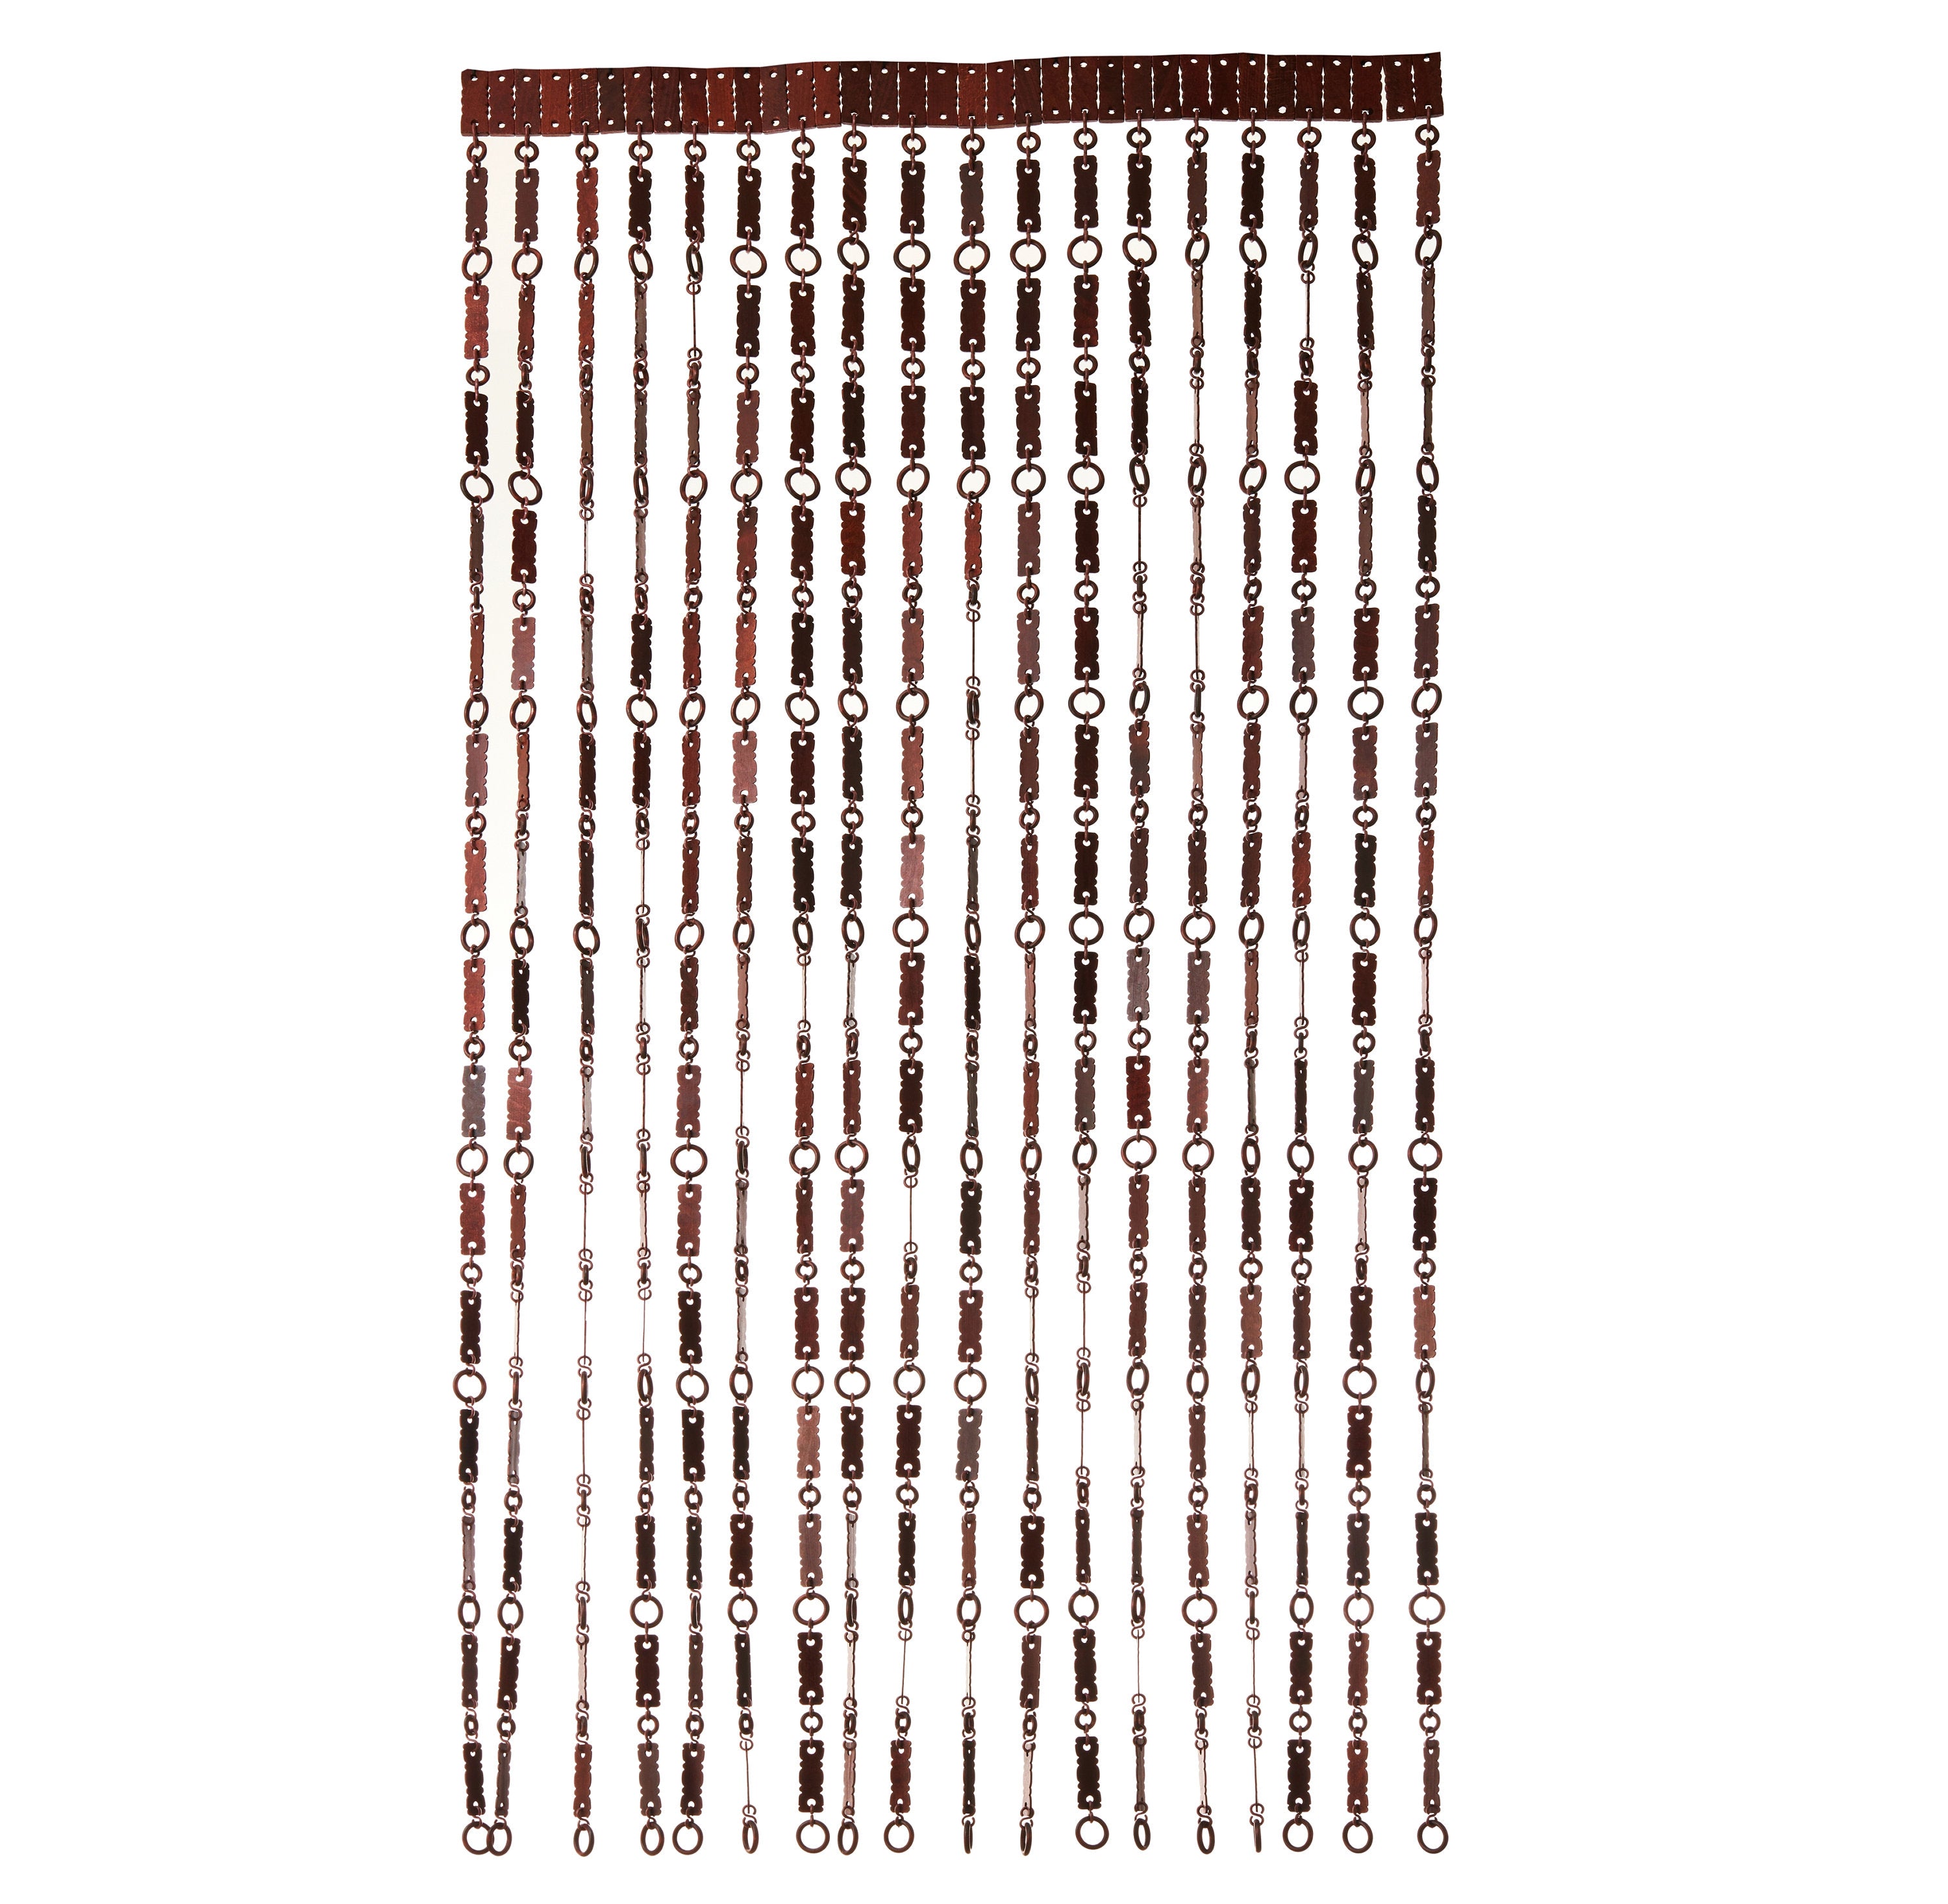 Door Curtain Screen From Wooden Beads. Hanging Handmade Beaded Door Blinds - Size 90 x 200 cm - Easy To Resize And Install